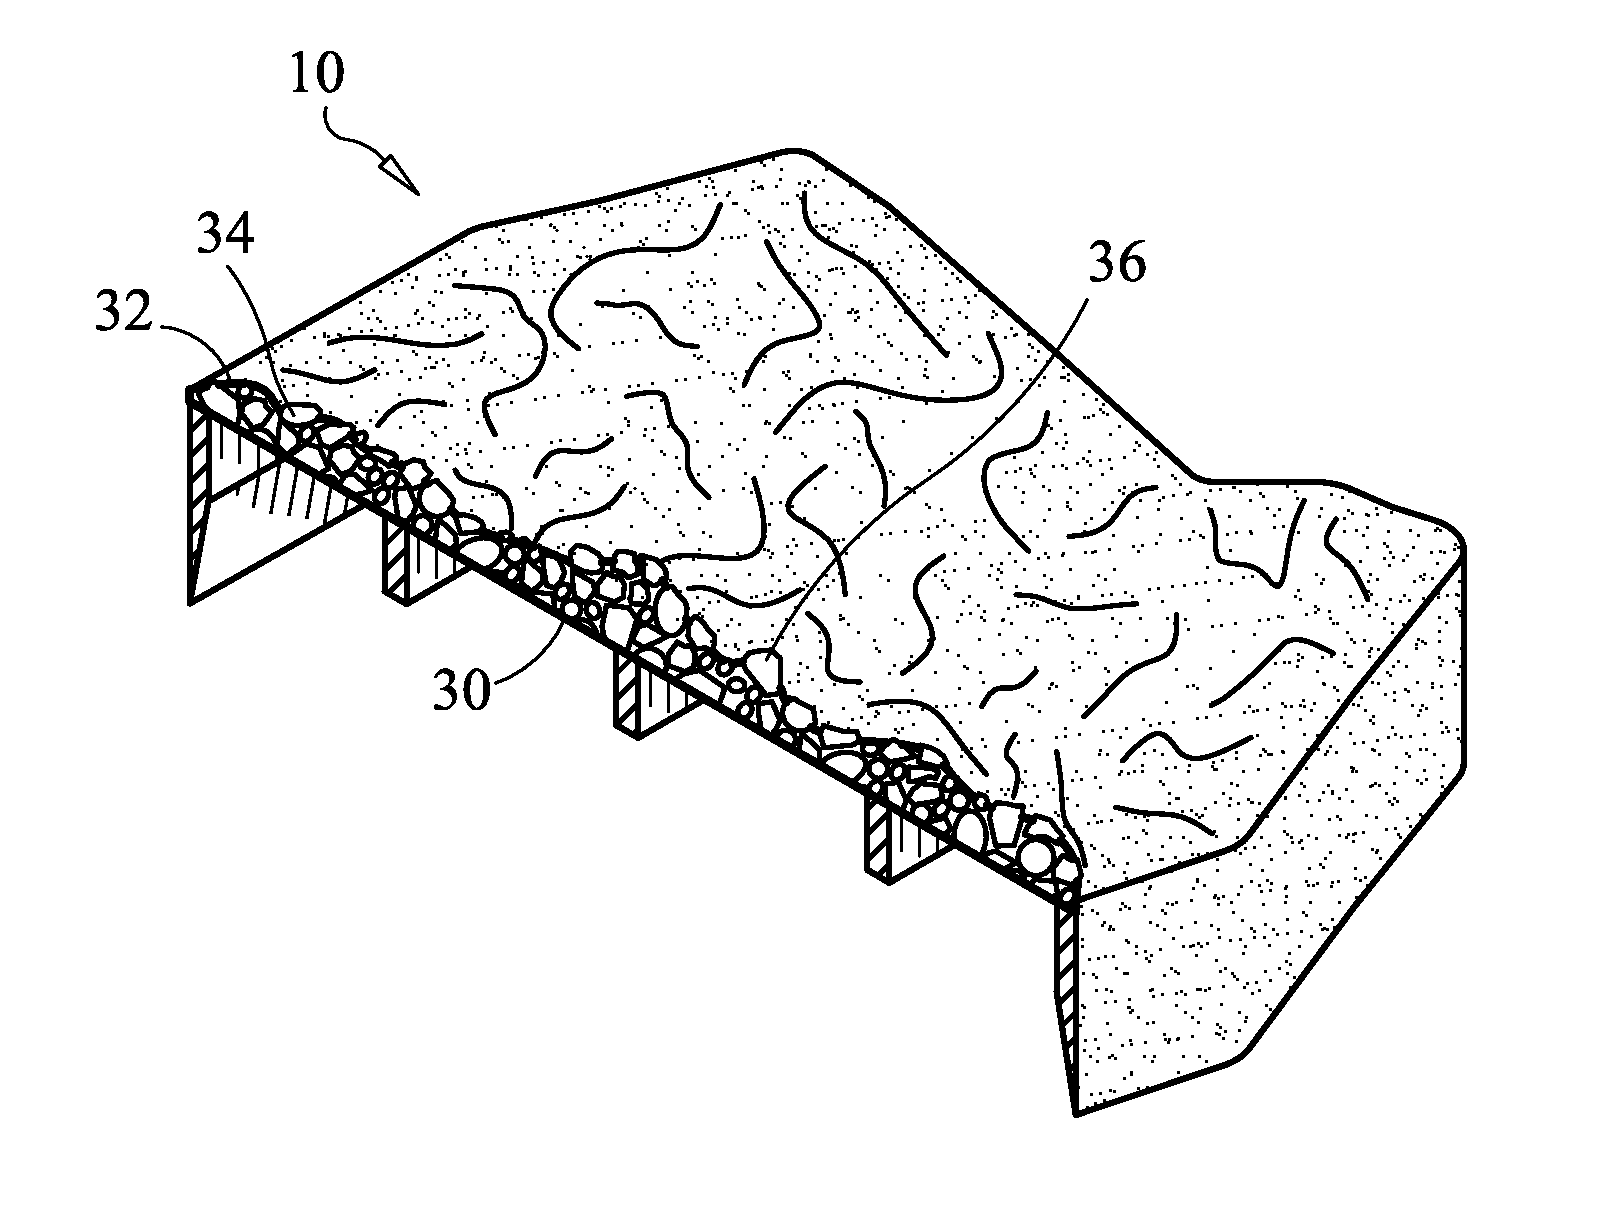 Paving block formed of rubber crumb and a method of manufacturing the same